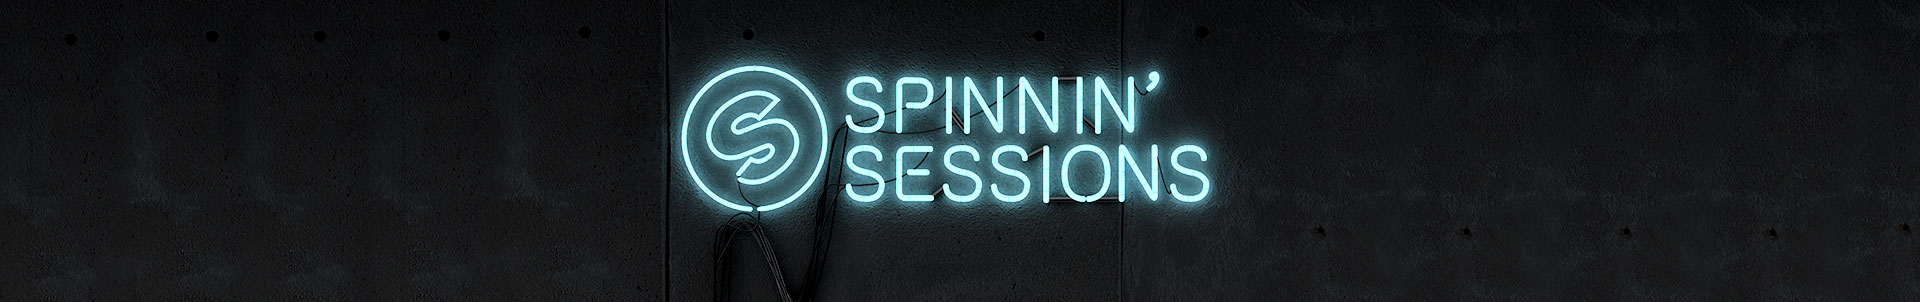 Listen to the best tracks of Spinnin' Records in 2016